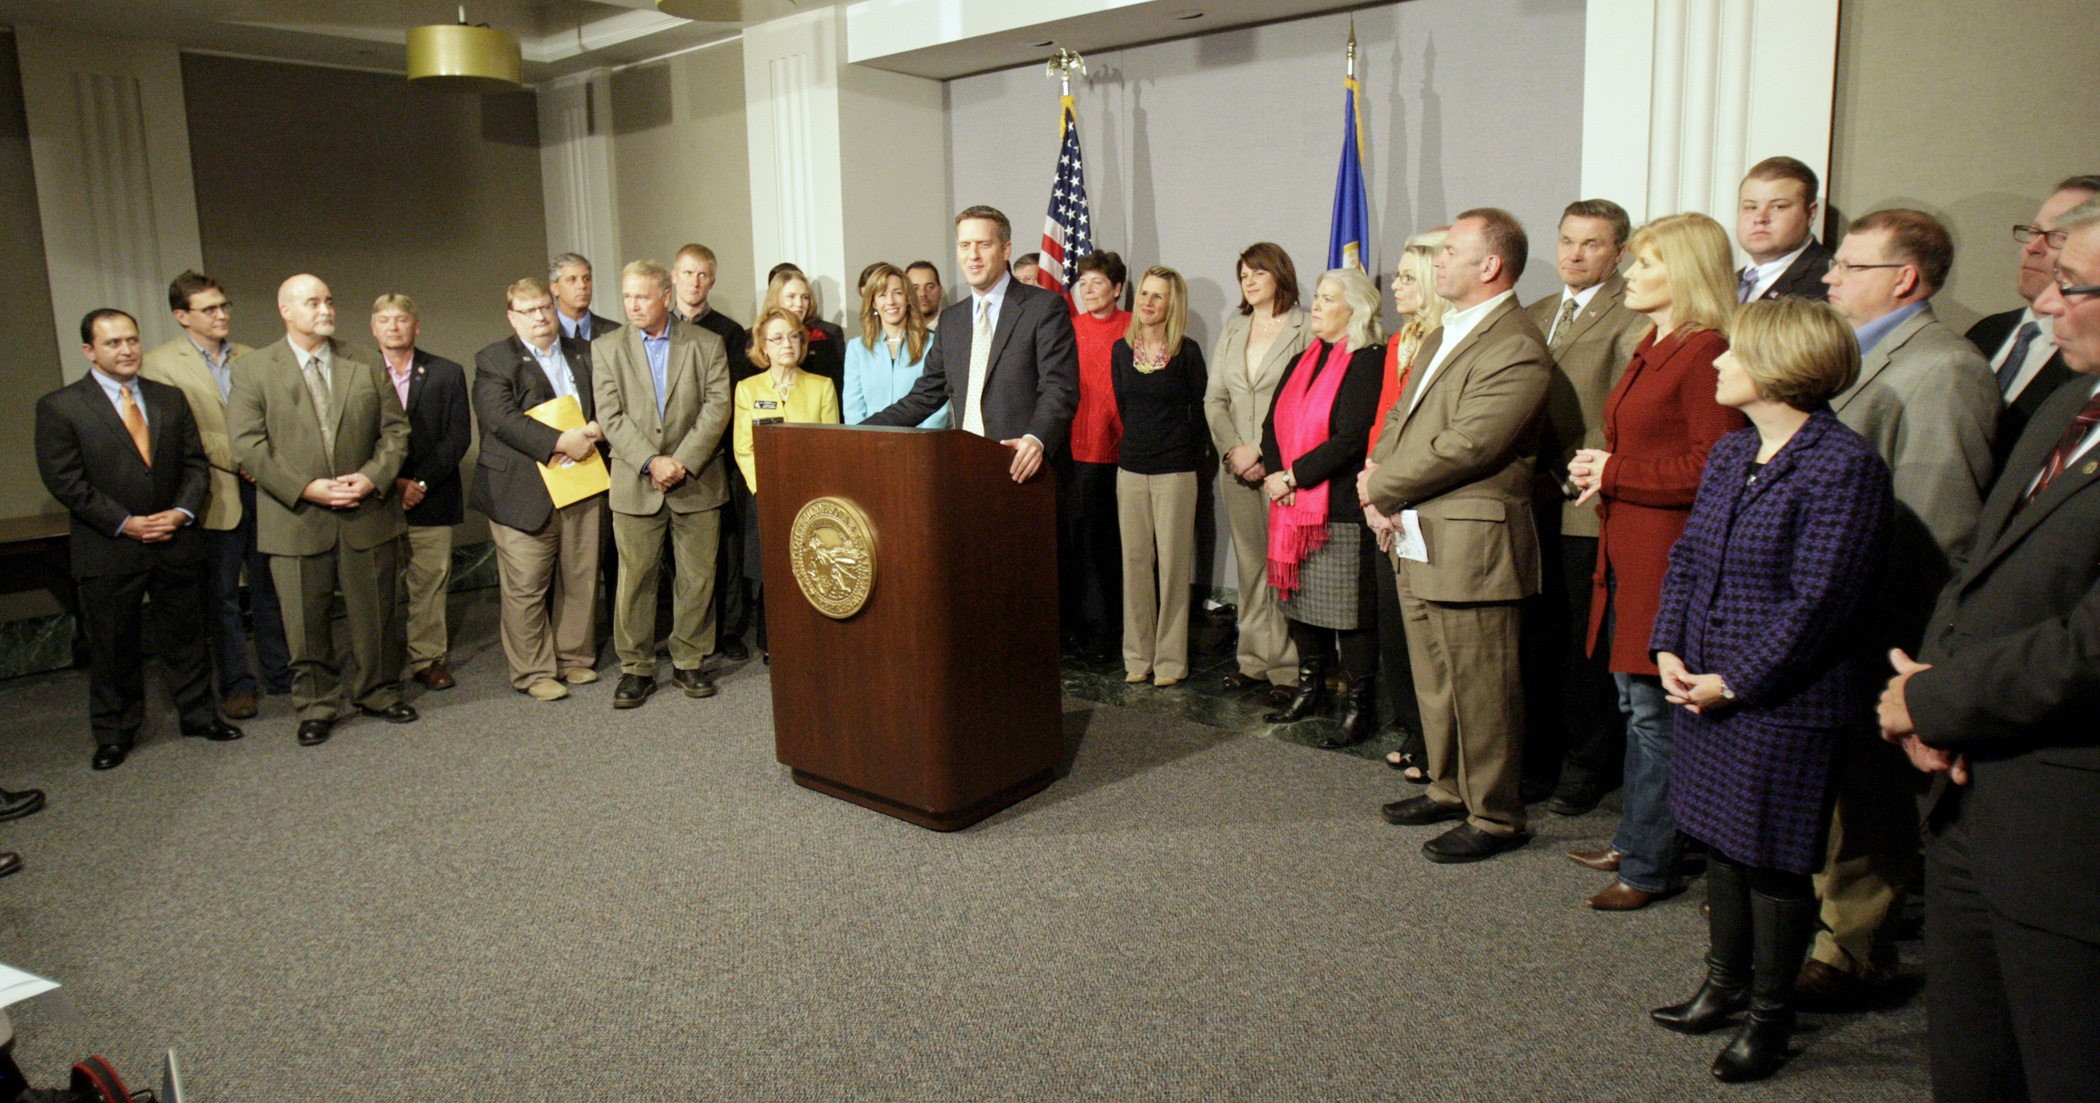 House Minority Leader Kurt Daudt answers questions at a post-election news conference, surrounded by many members of the new House majority party. Republicans will have a 72-62 seat advantage in the House for the 2015-16 biennium. Photo by Paul Battaglia